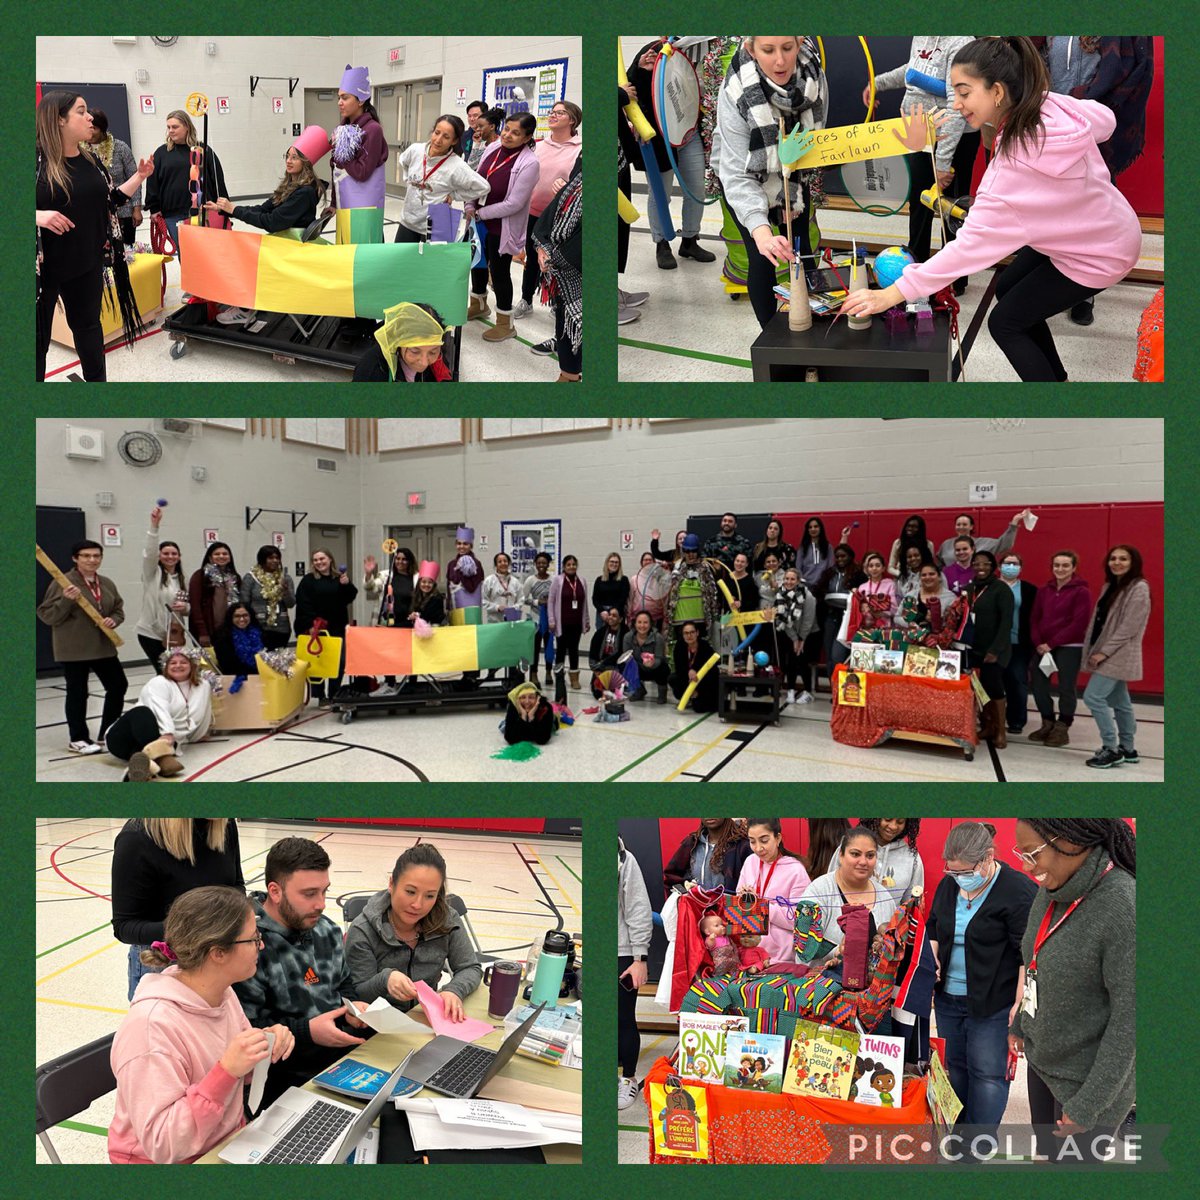 Todays PL brought @FairlawnPSPDSB educators 2gether INcommunity to ACTION integrative STEAM/EML challenges, responsive to Ss lived experiences & global histories #planningwithintention #STEM #EML #studentcentred @peel21st @PeelSchools @Stephen4Equity